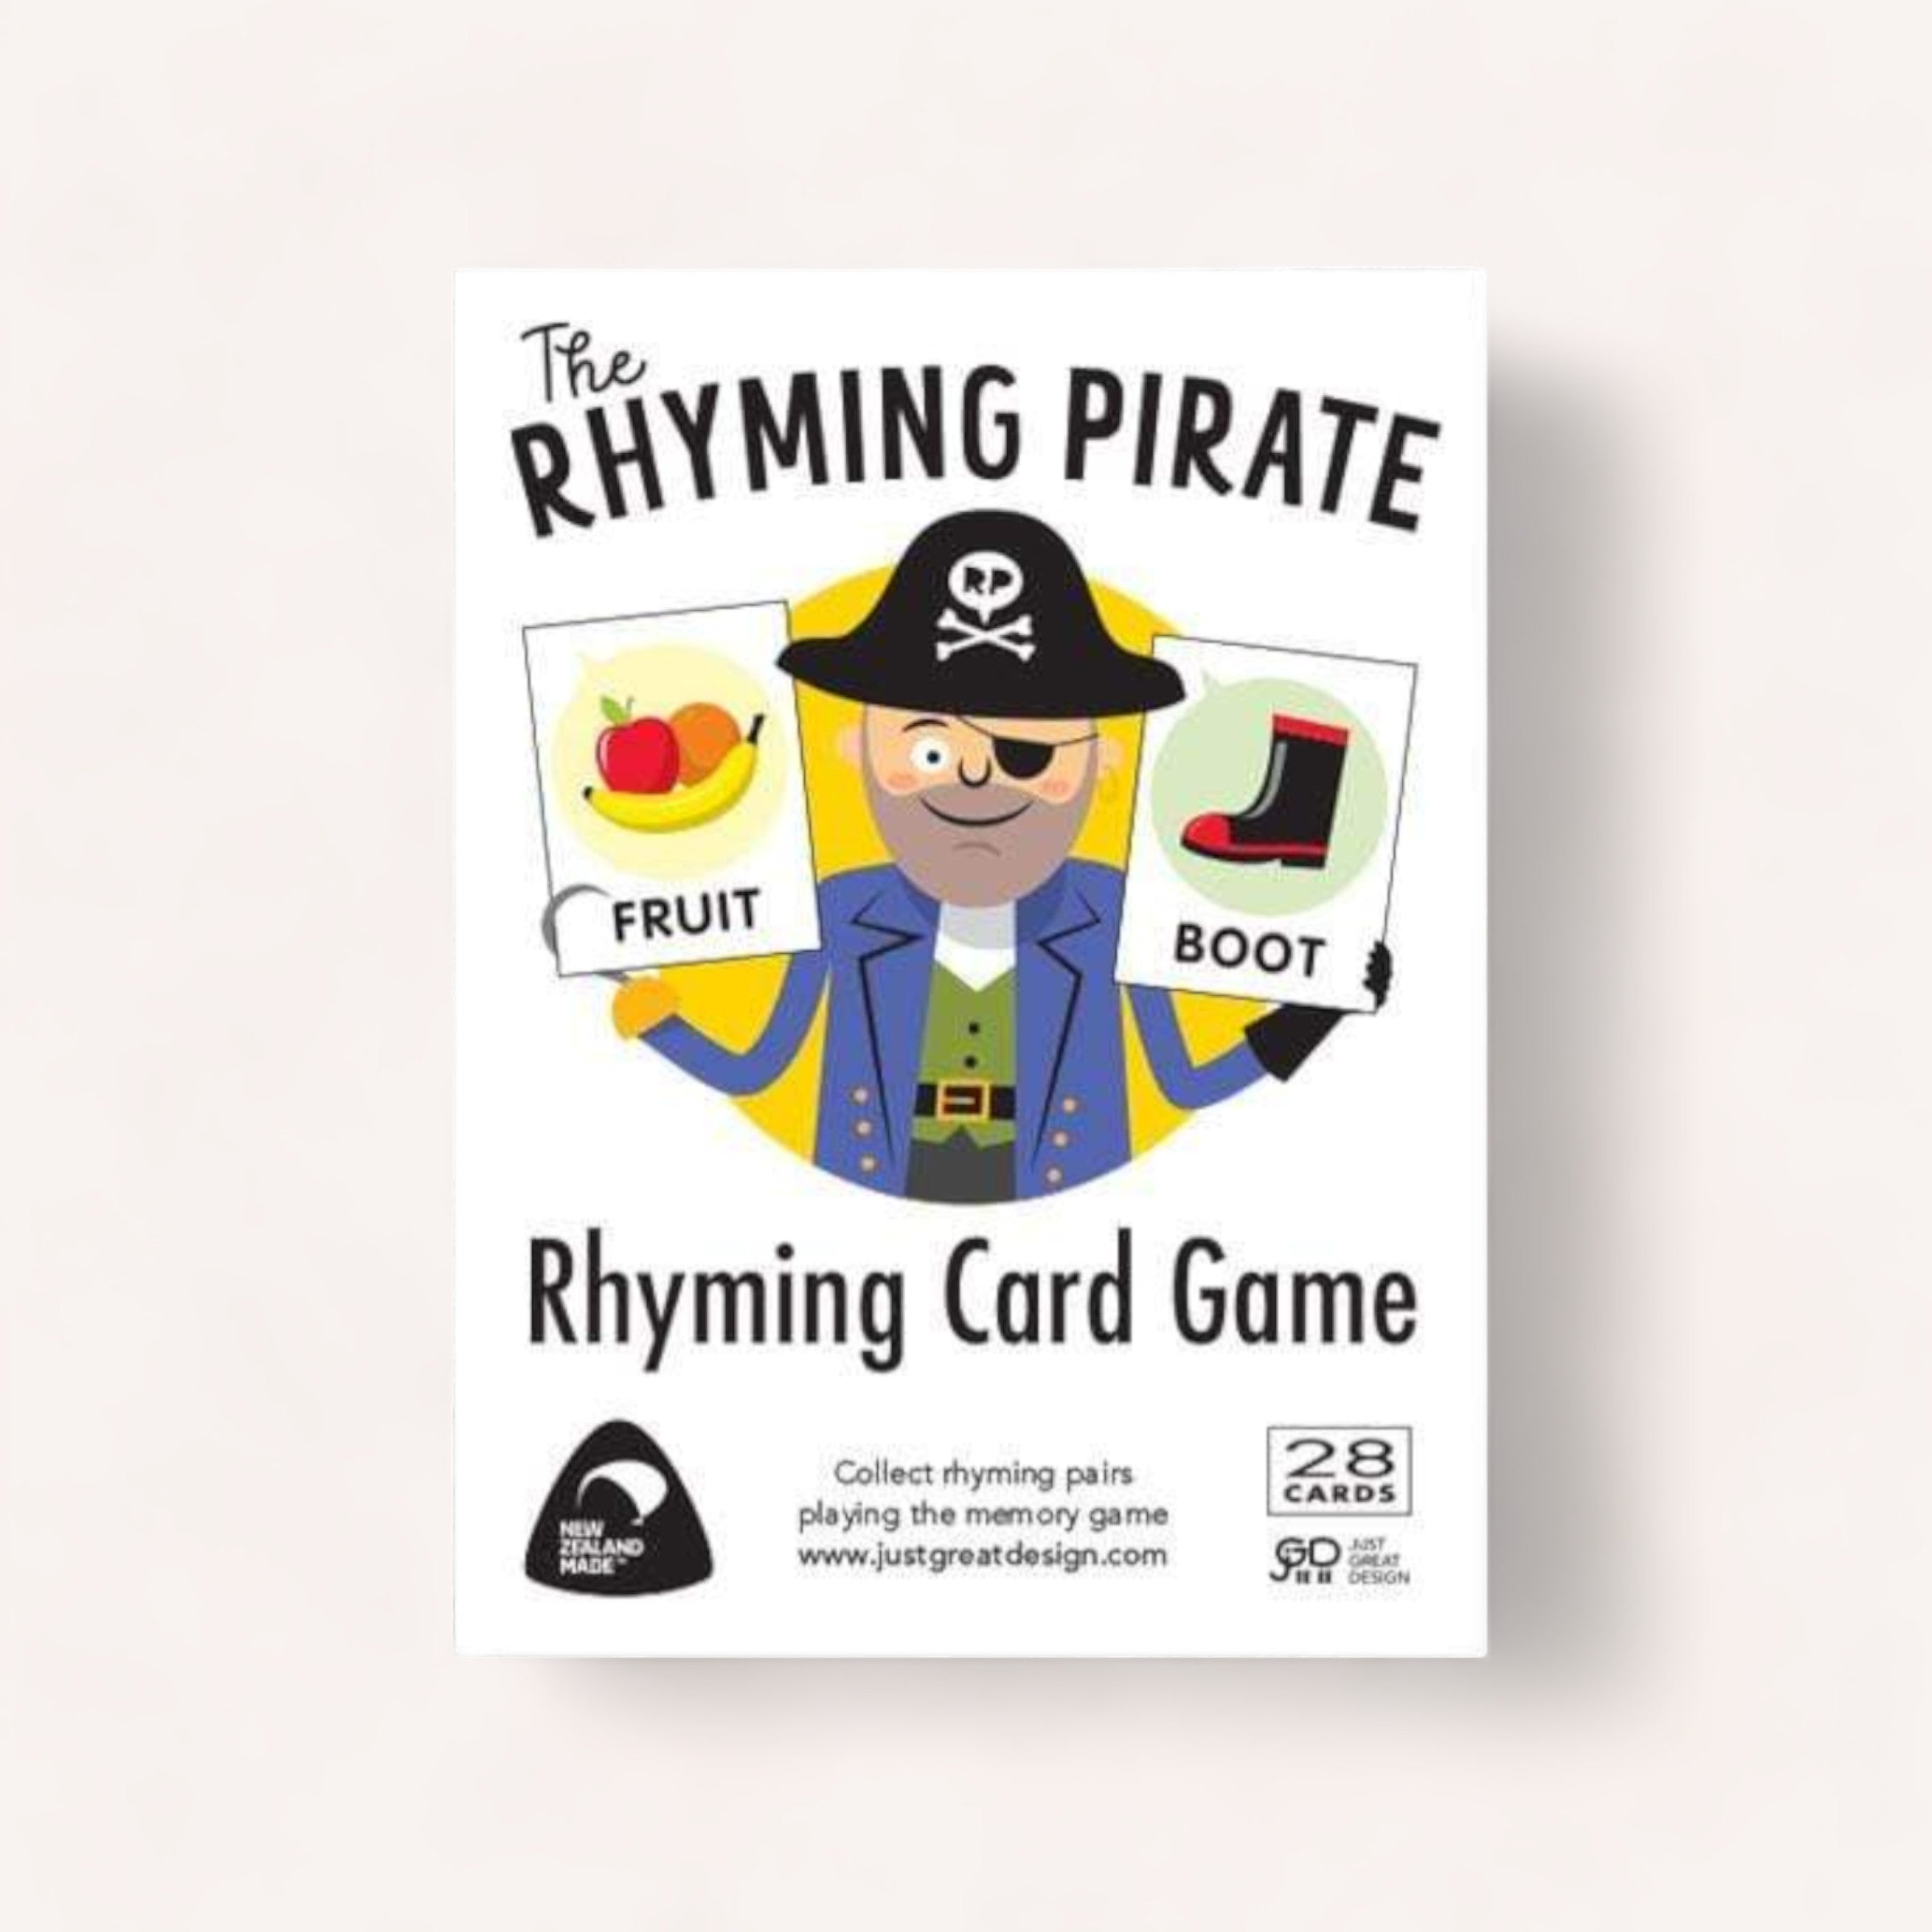 A colorful and playful packaging design for the 'Rhyming Pirate Flash Cards' memory card game by Glenn Jones Accessories, featuring an illustration of a cheerful pirate and examples of rhyming objects, 'fruit' and 'boot.'